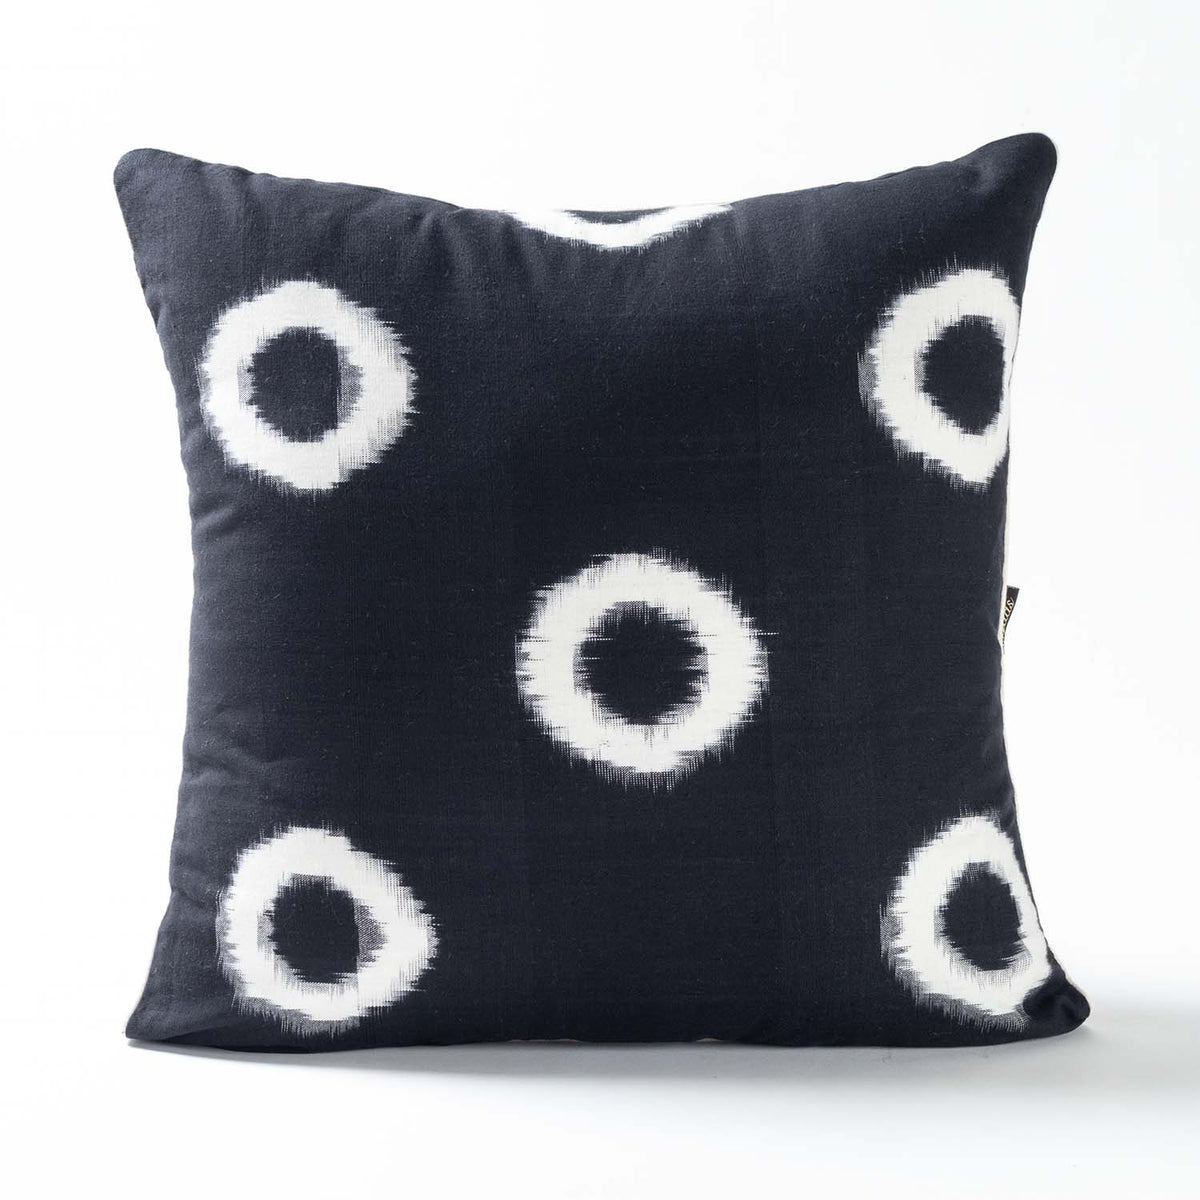 Handwoven Ikat Cushion Cover - 18x18